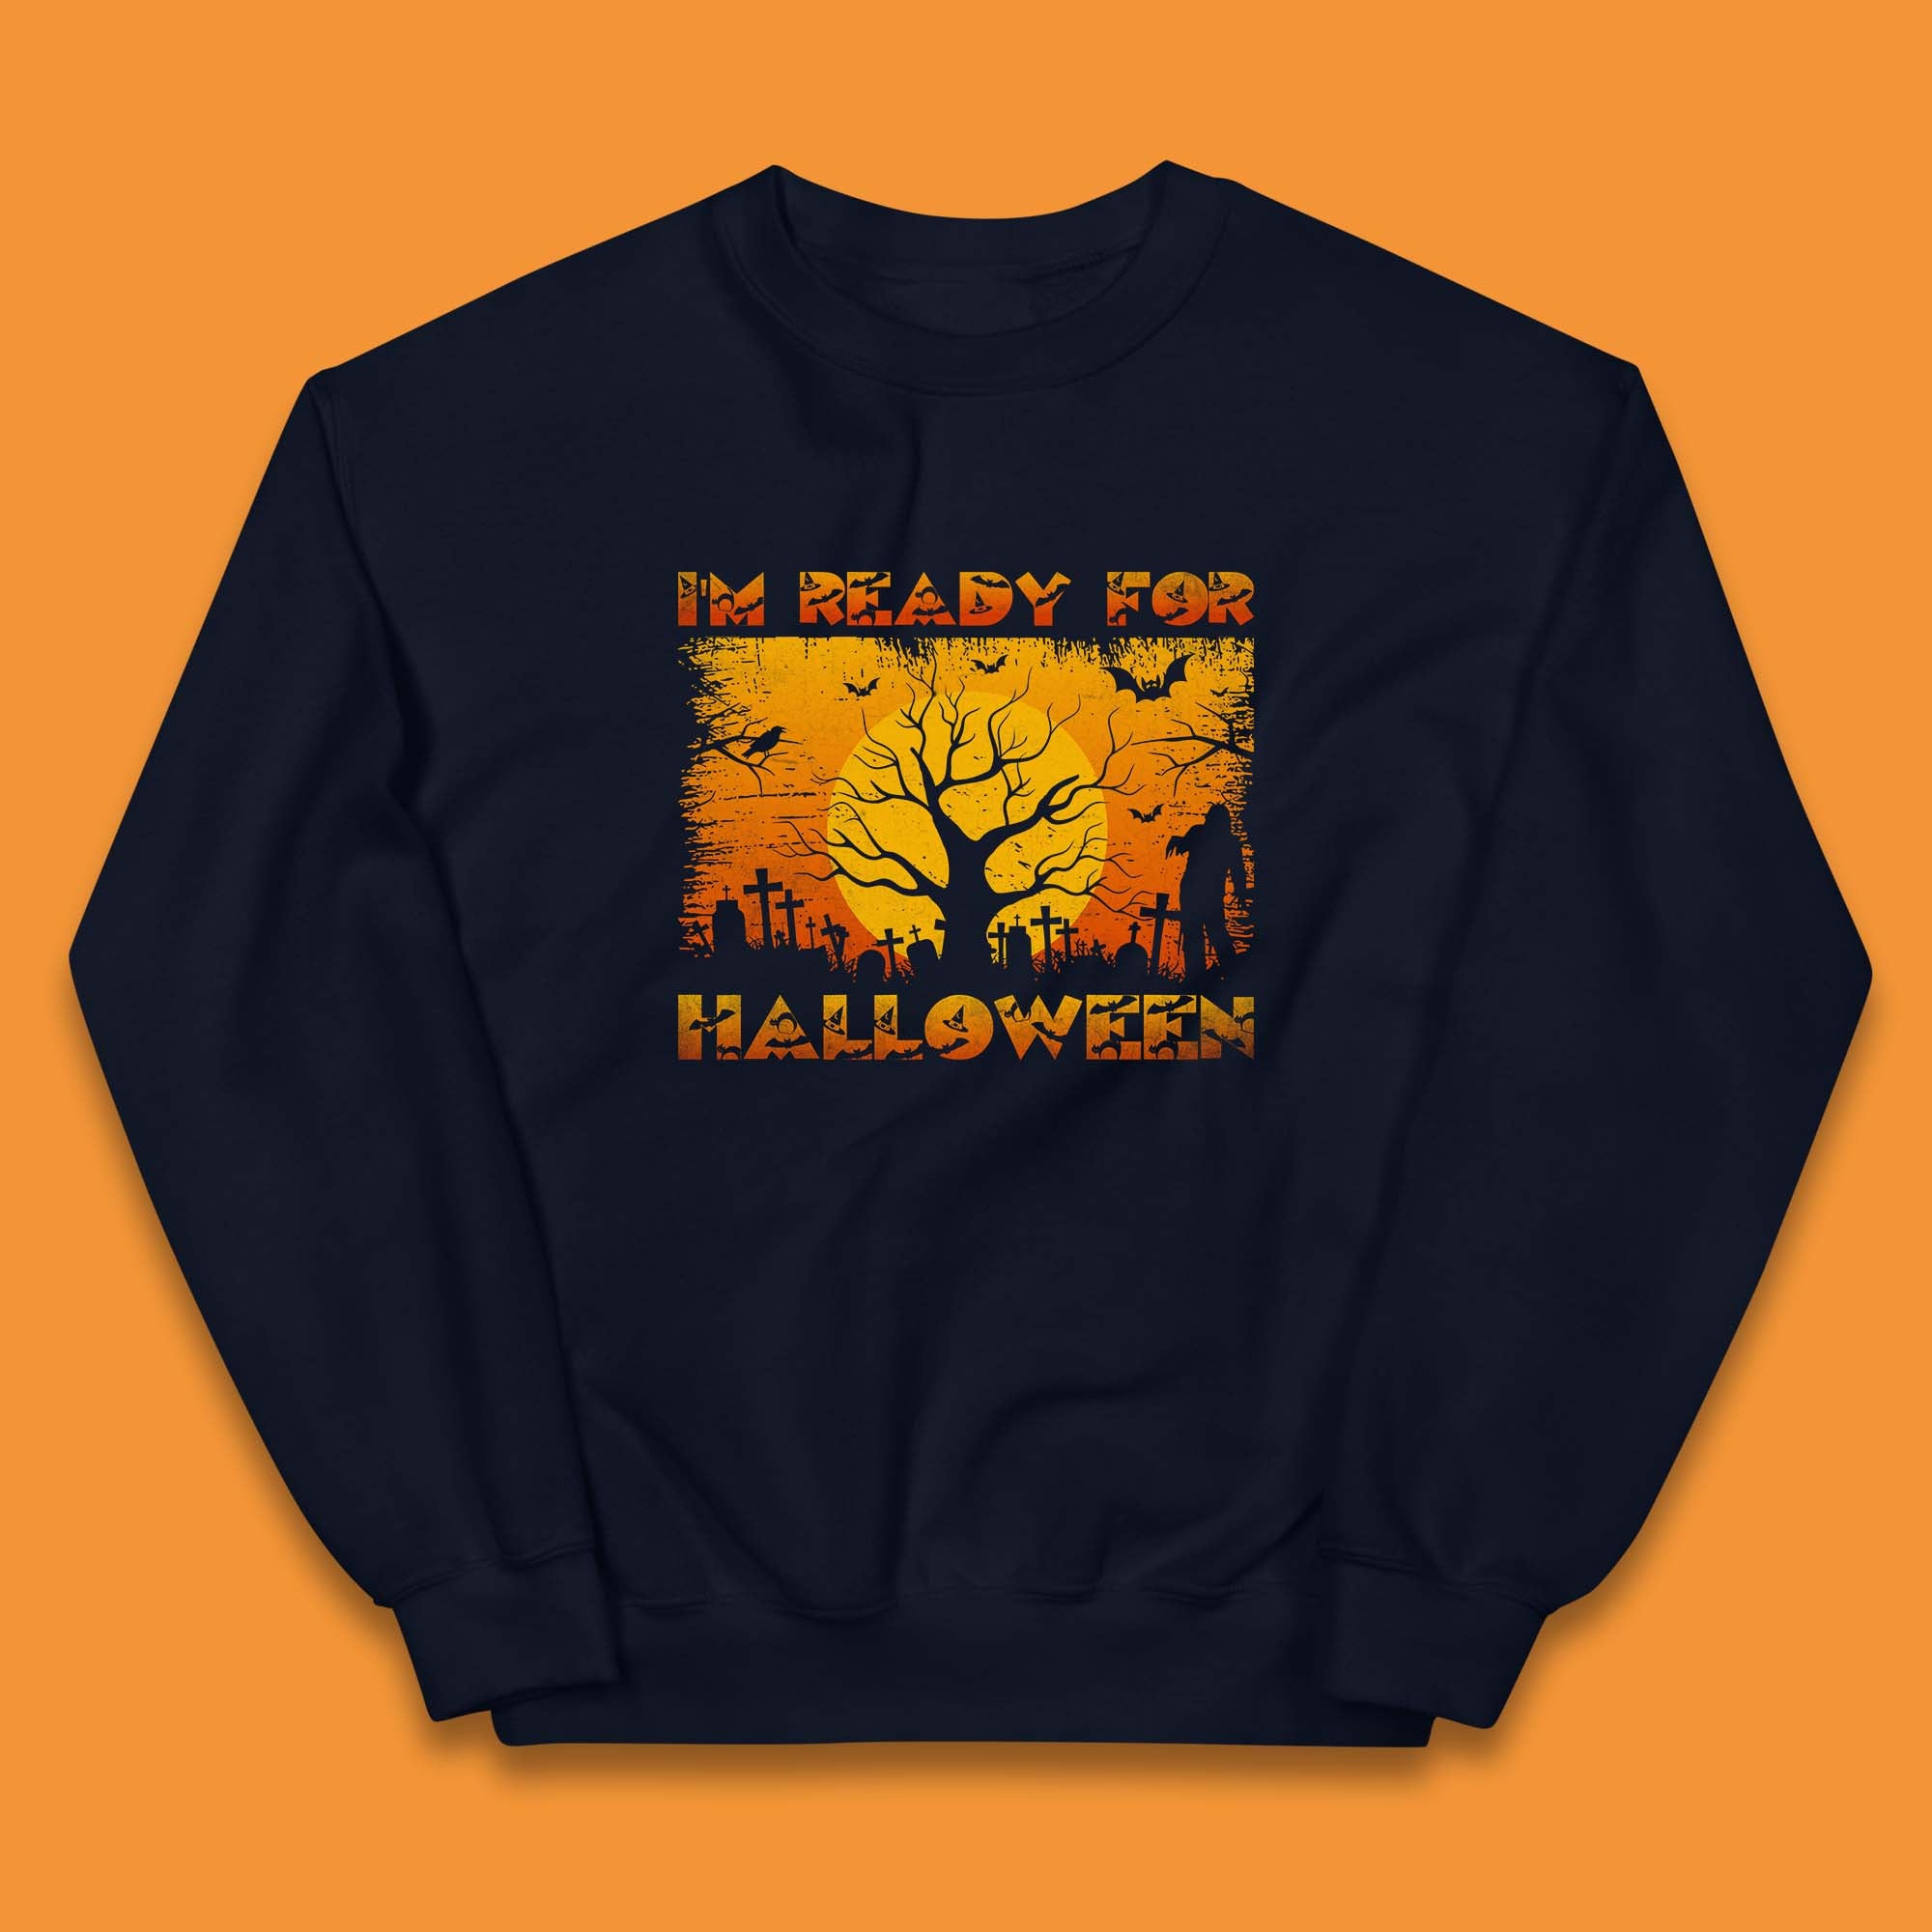 I'm Ready For Halloween Horror Scary Halloween Zombie Graveyards With Dead Tree Kids Jumper